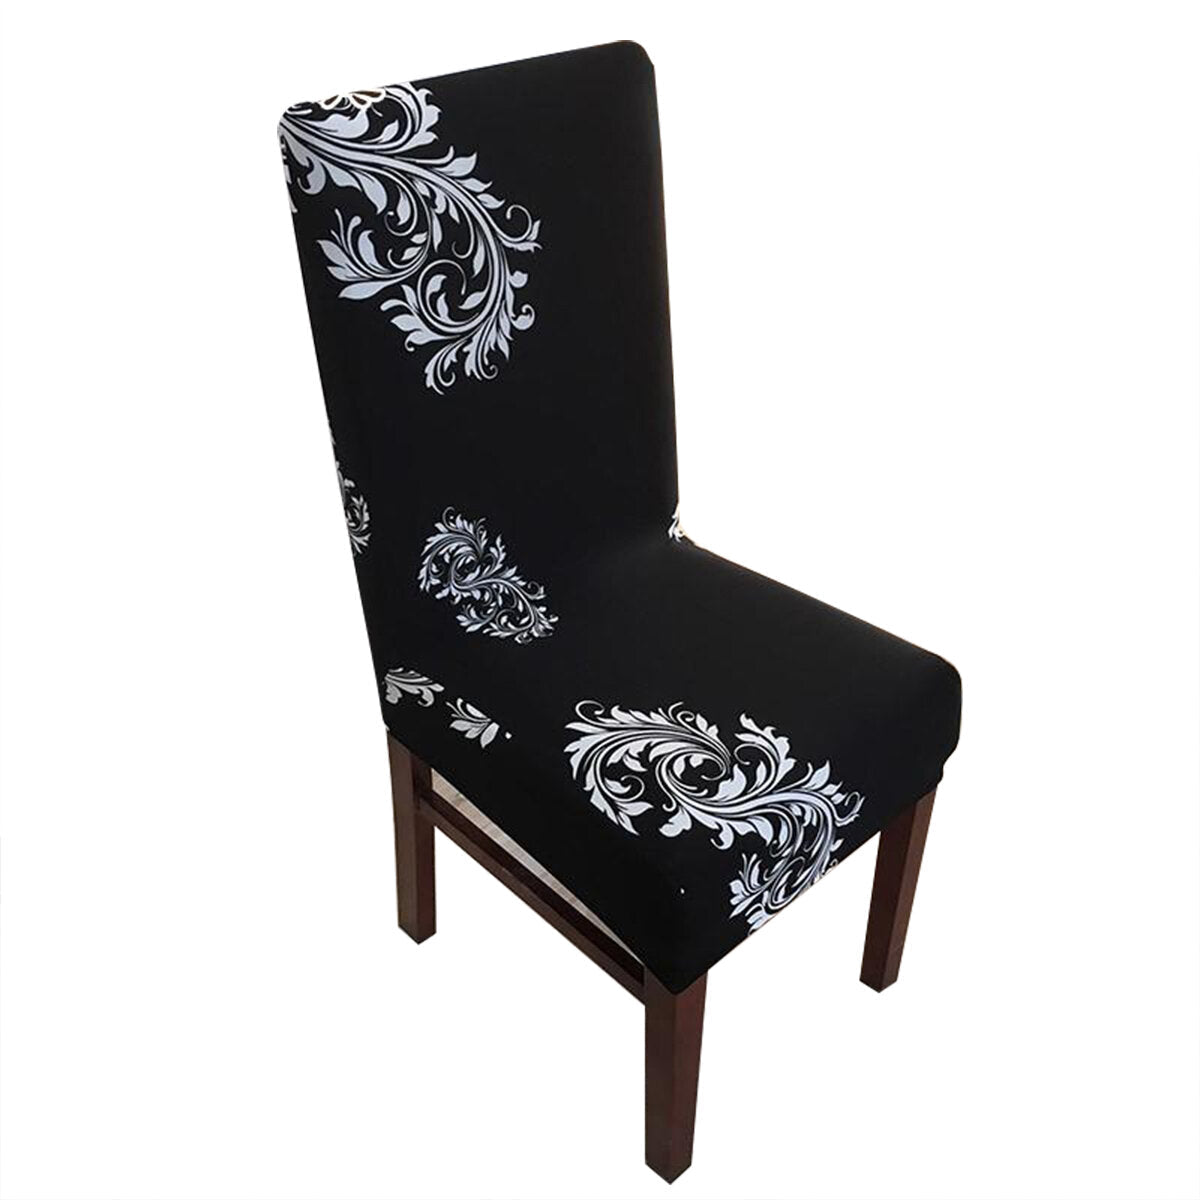 Dining Chair Cover Elastic Removable Chair Seat Protector Stretch Slipcover For Dining Room Wedding Banquet Party Hotel Kitchen Home Office Decor